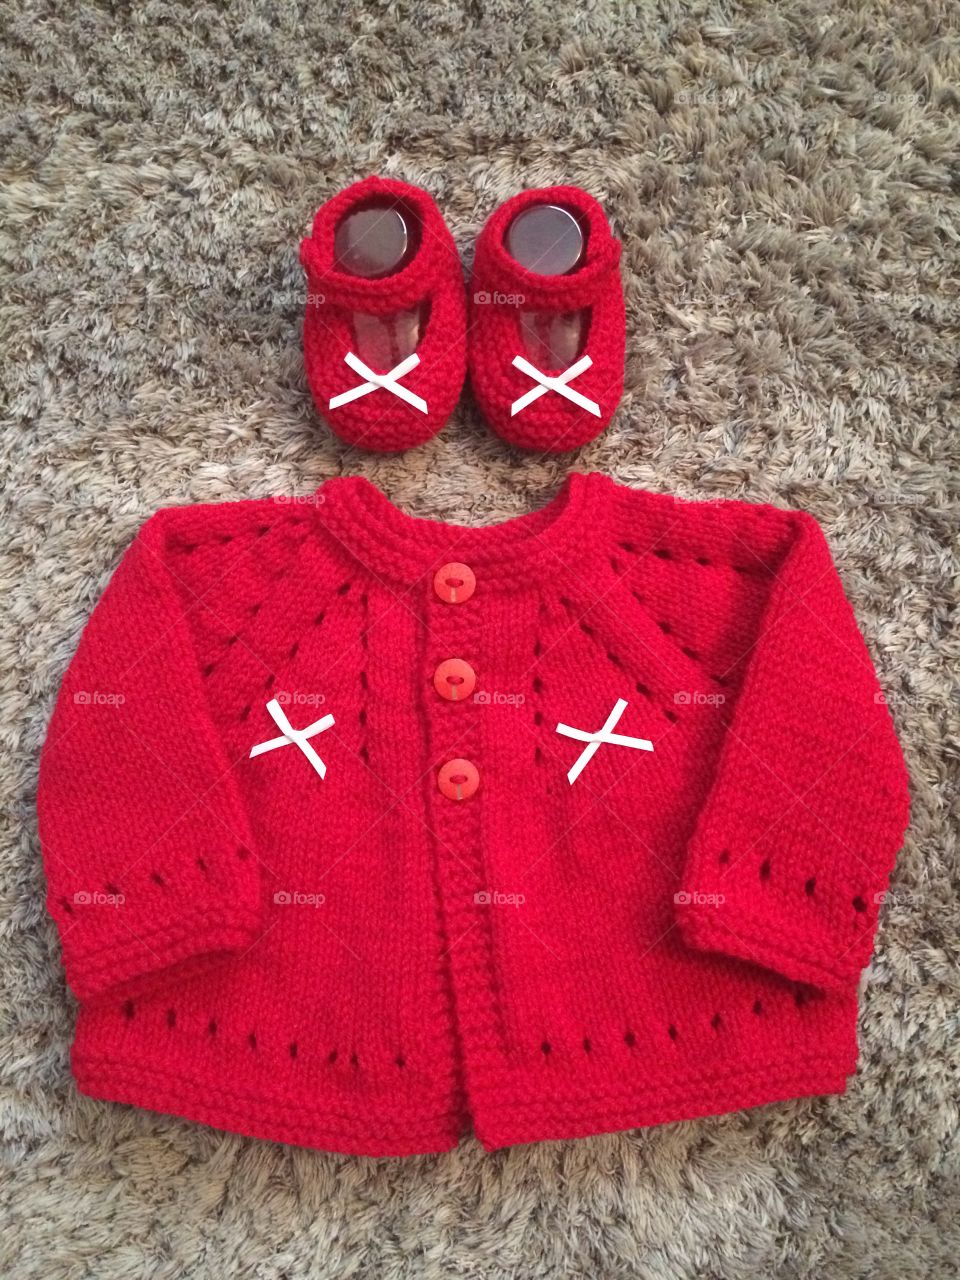 Hand knitted baby cardigan and Mary Jane style shoes